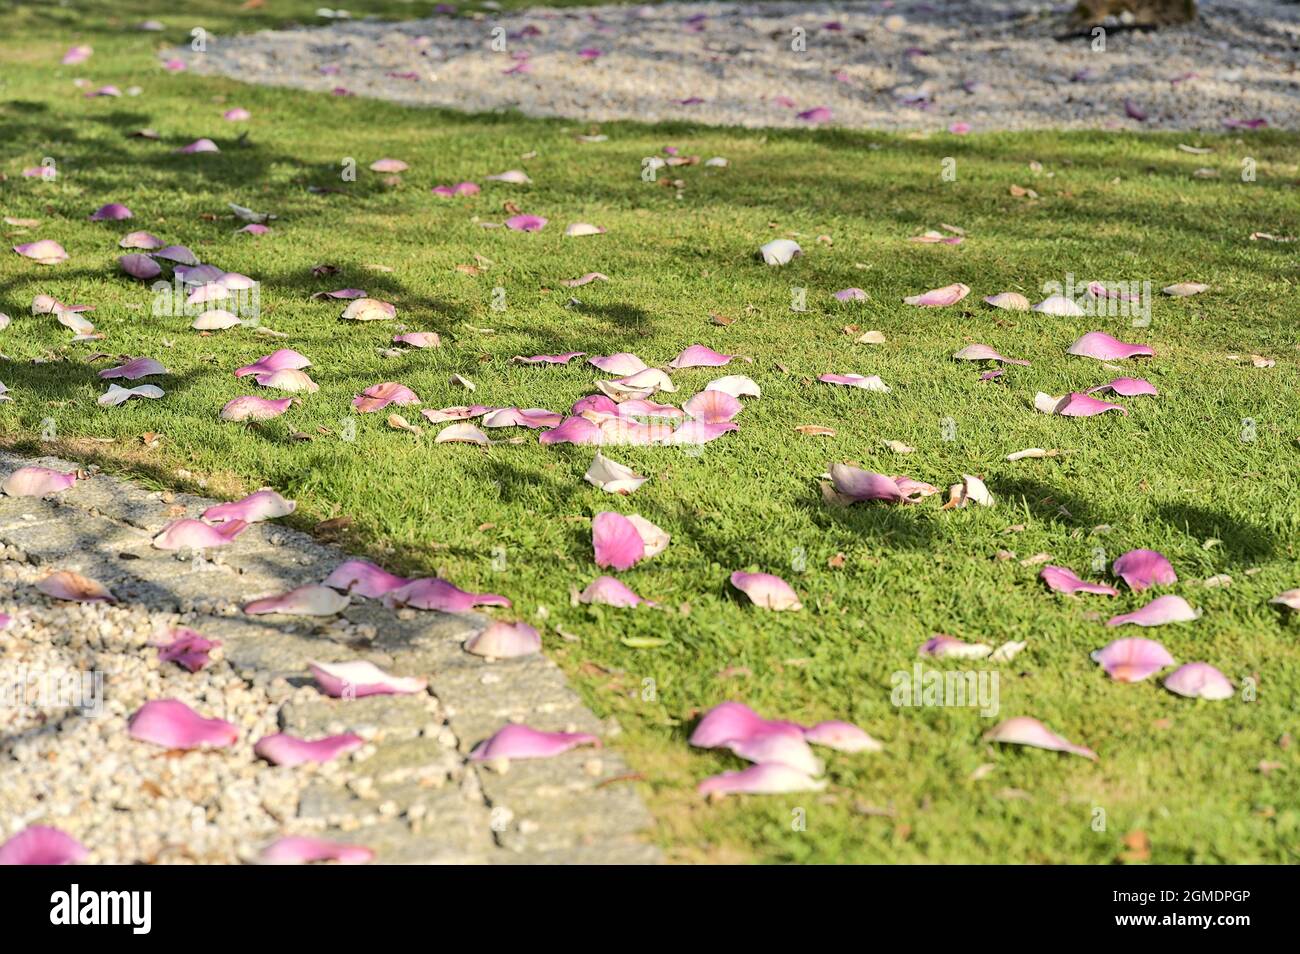 Beautiful closeup view of pink fallen petals of low growing Chinese saucer magnolia (Magnolia Soulangeana) tree, with round gray stone mulching Stock Photo